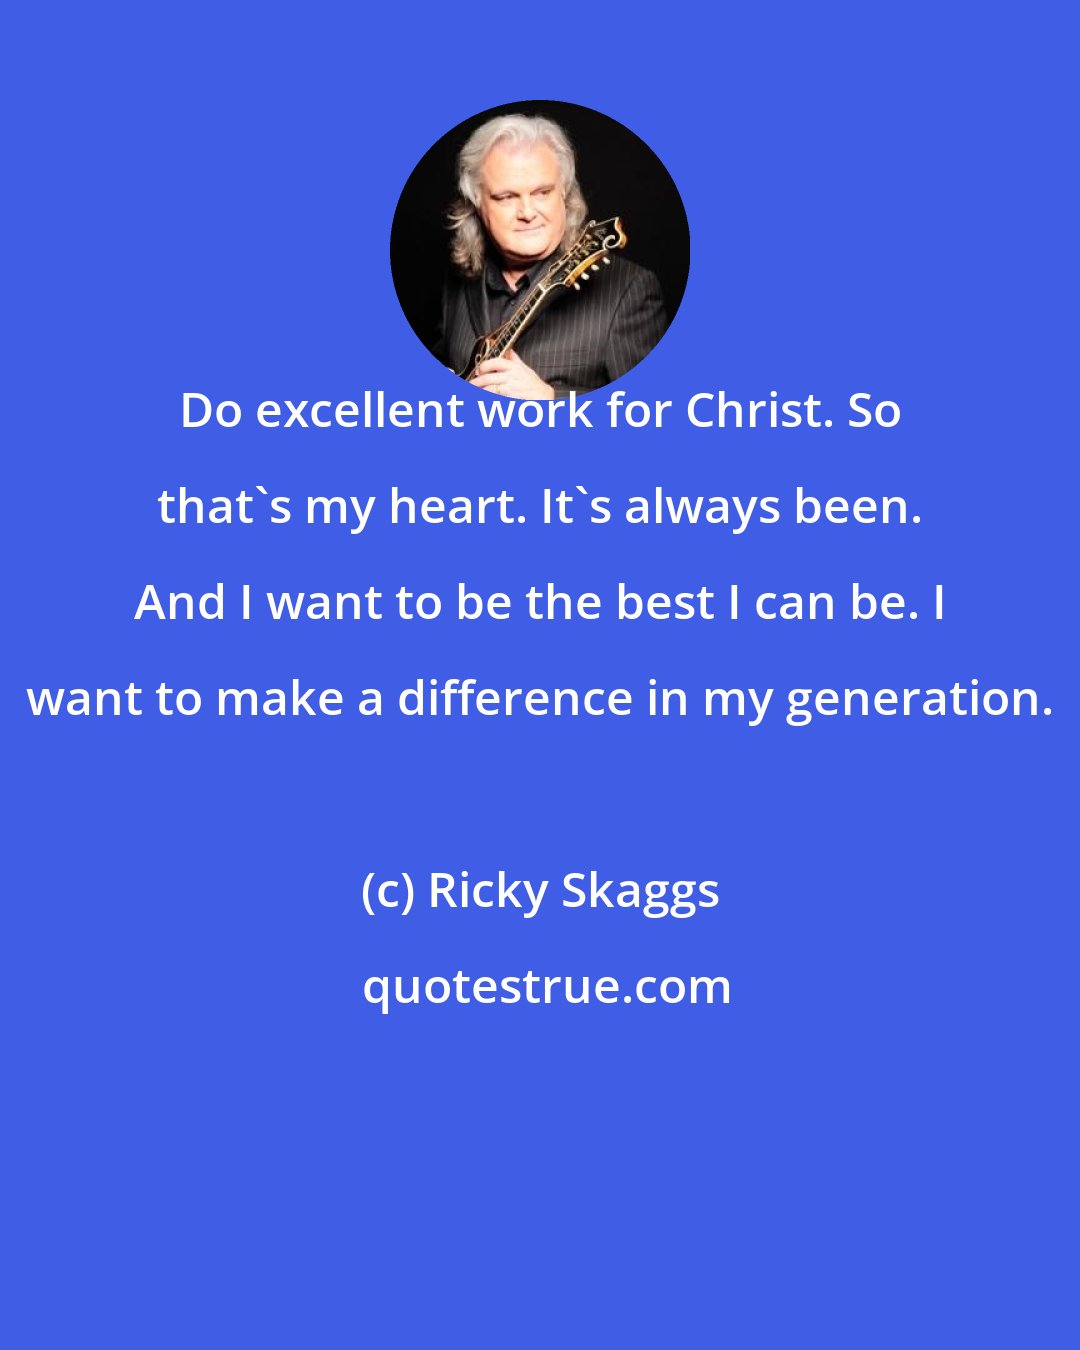 Ricky Skaggs: Do excellent work for Christ. So that's my heart. It's always been. And I want to be the best I can be. I want to make a difference in my generation.